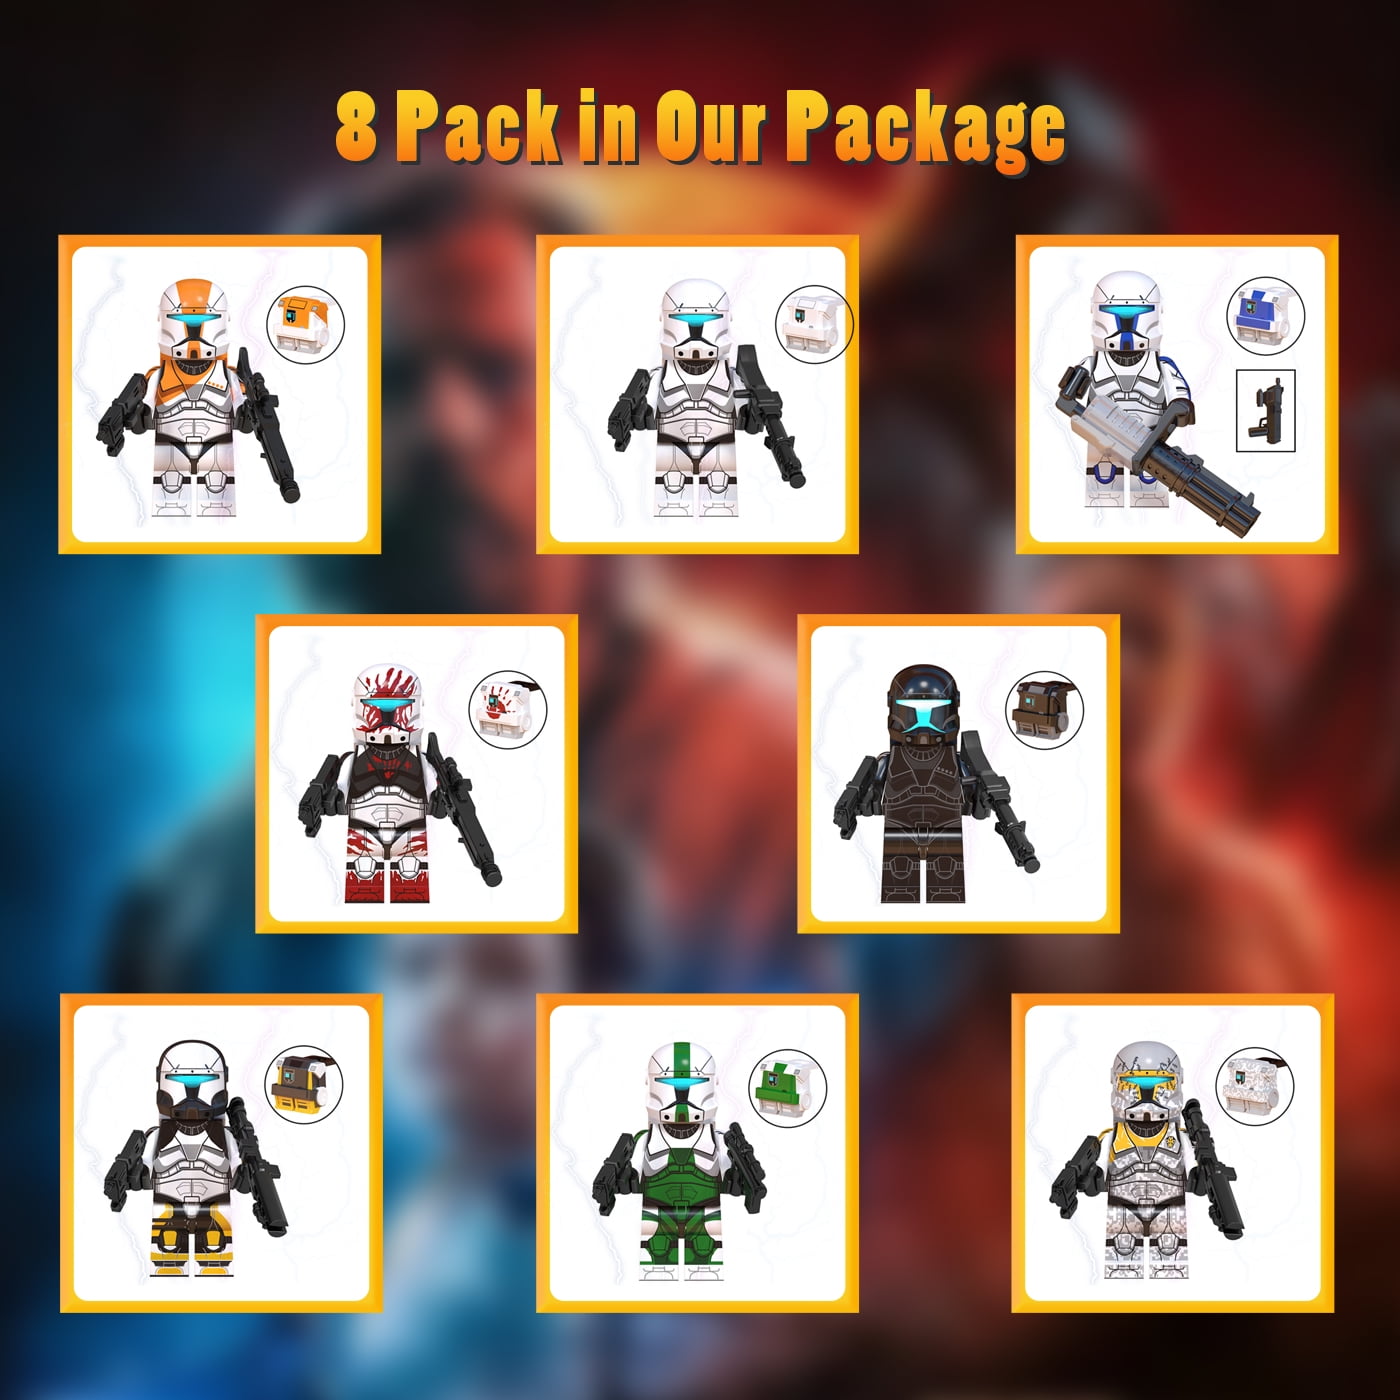 16 Pcs Star Wars Building Blocks Action Figures Battle Droids with Weapons  Set, 2Inch Space Wars Minifigures Building Blocks Toy for Kids Teens  Birthday Cake Toppers 